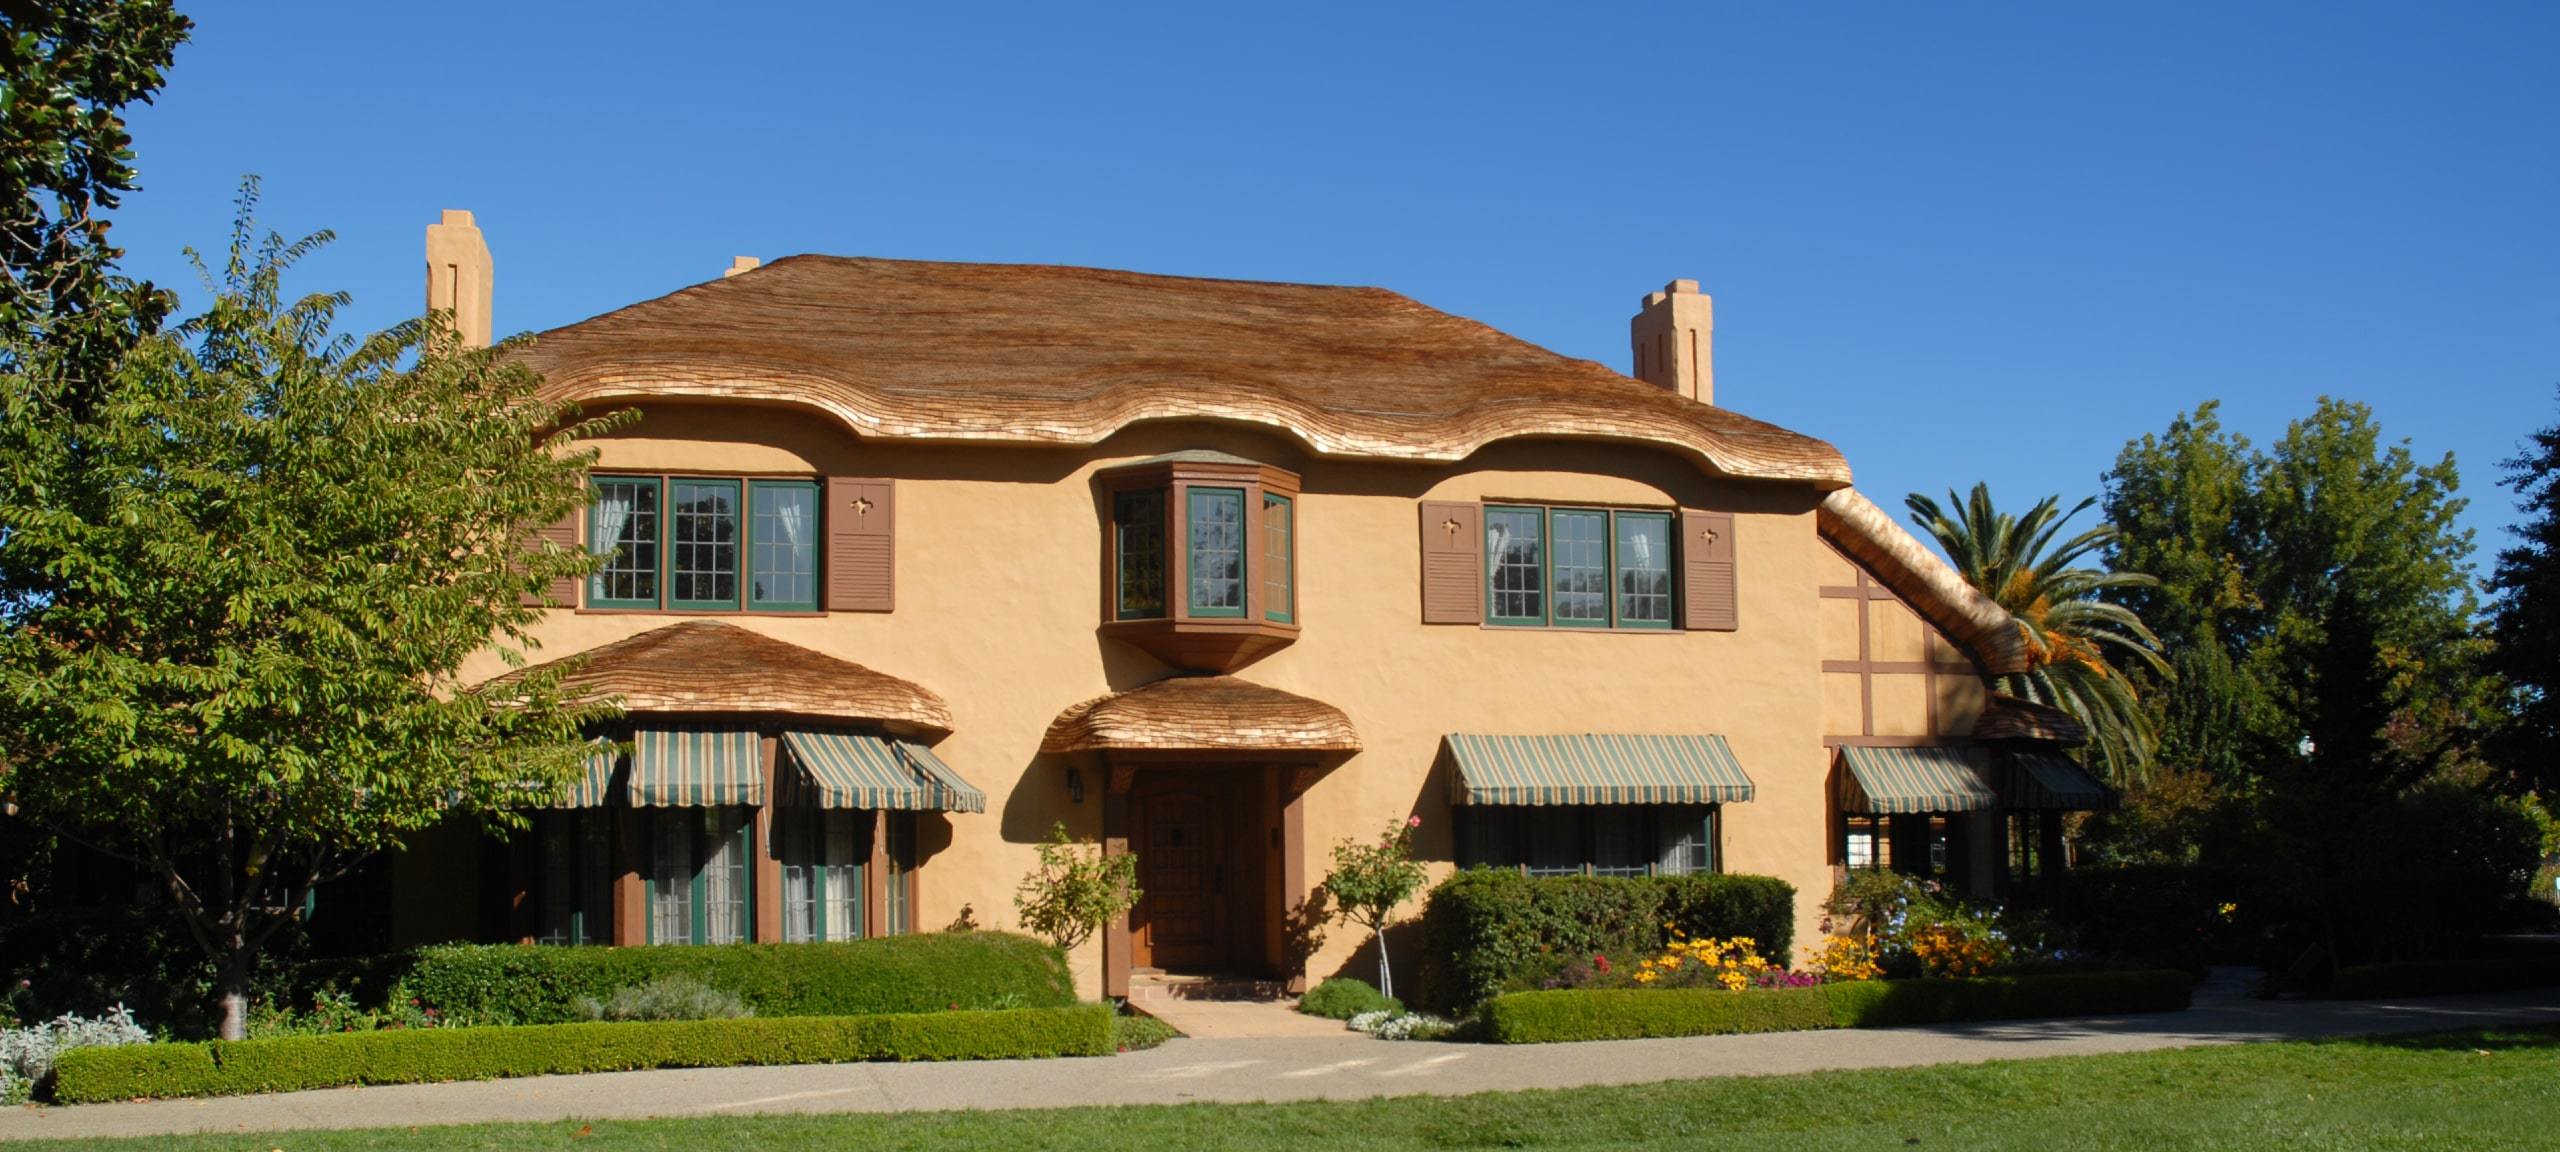 Exterior of Ainsley House in Campbell, California